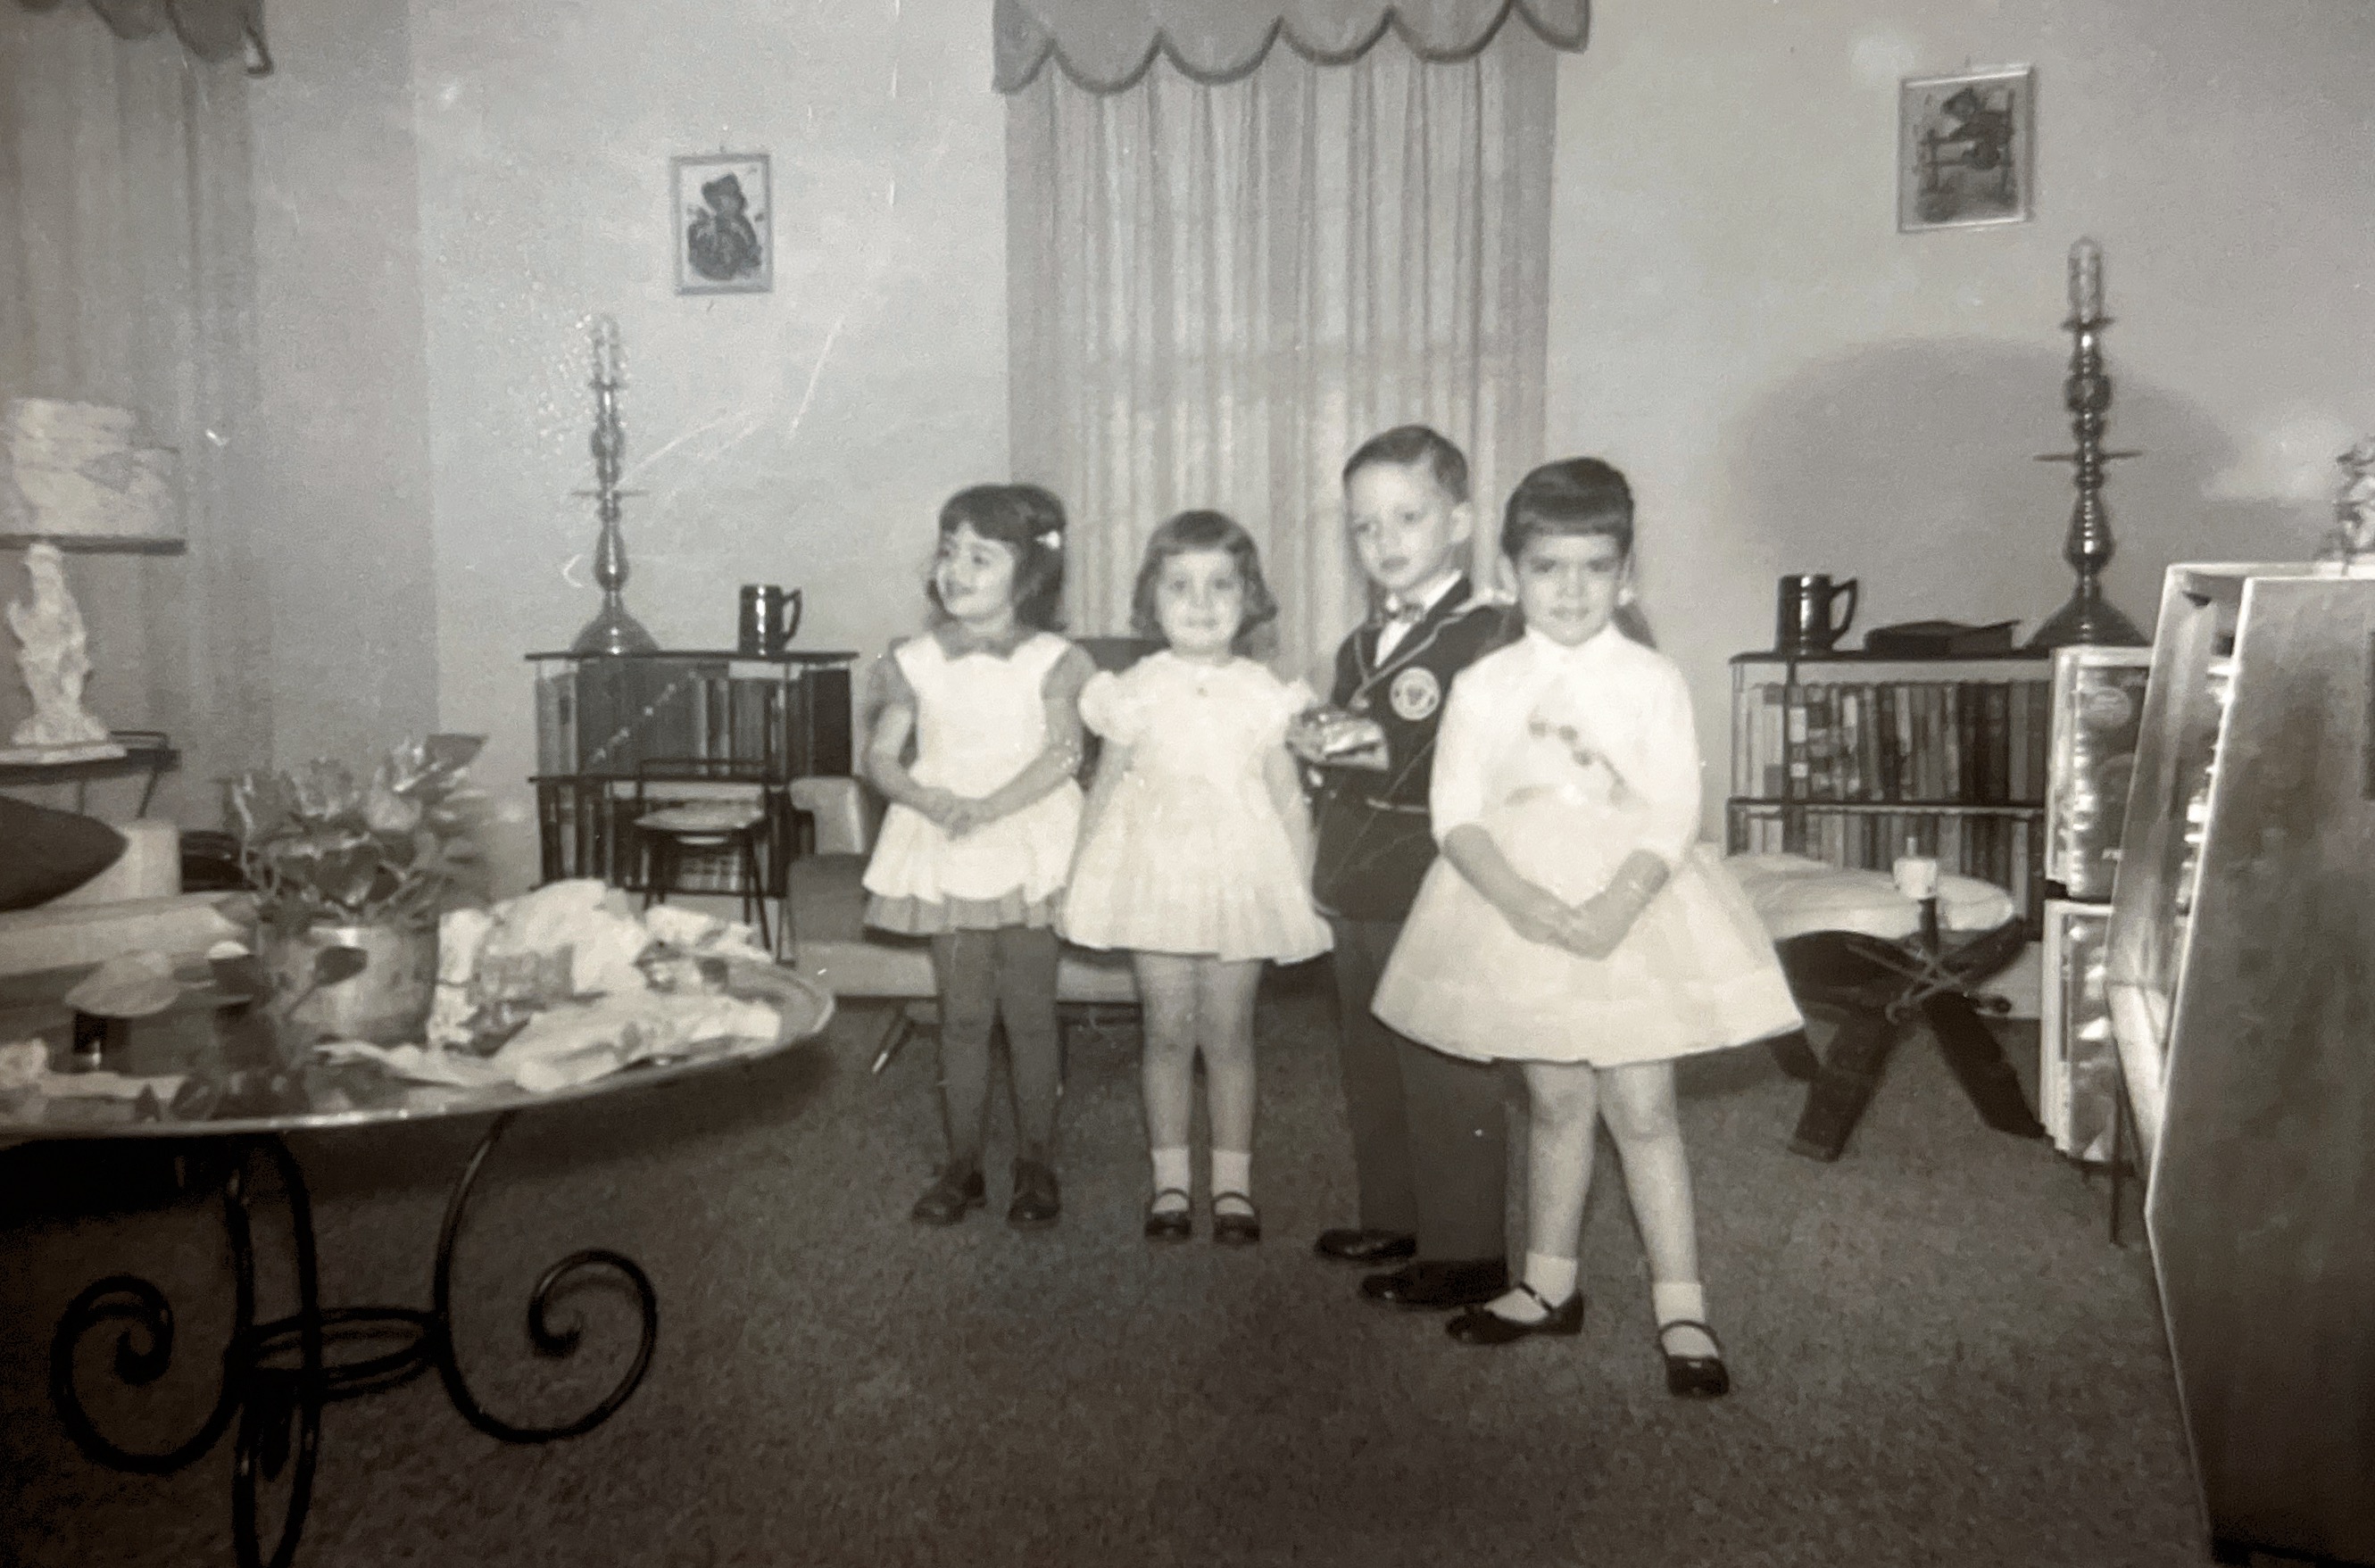 A birthday party c. 1960 when our parents ensured that we were well-behaved and proper.